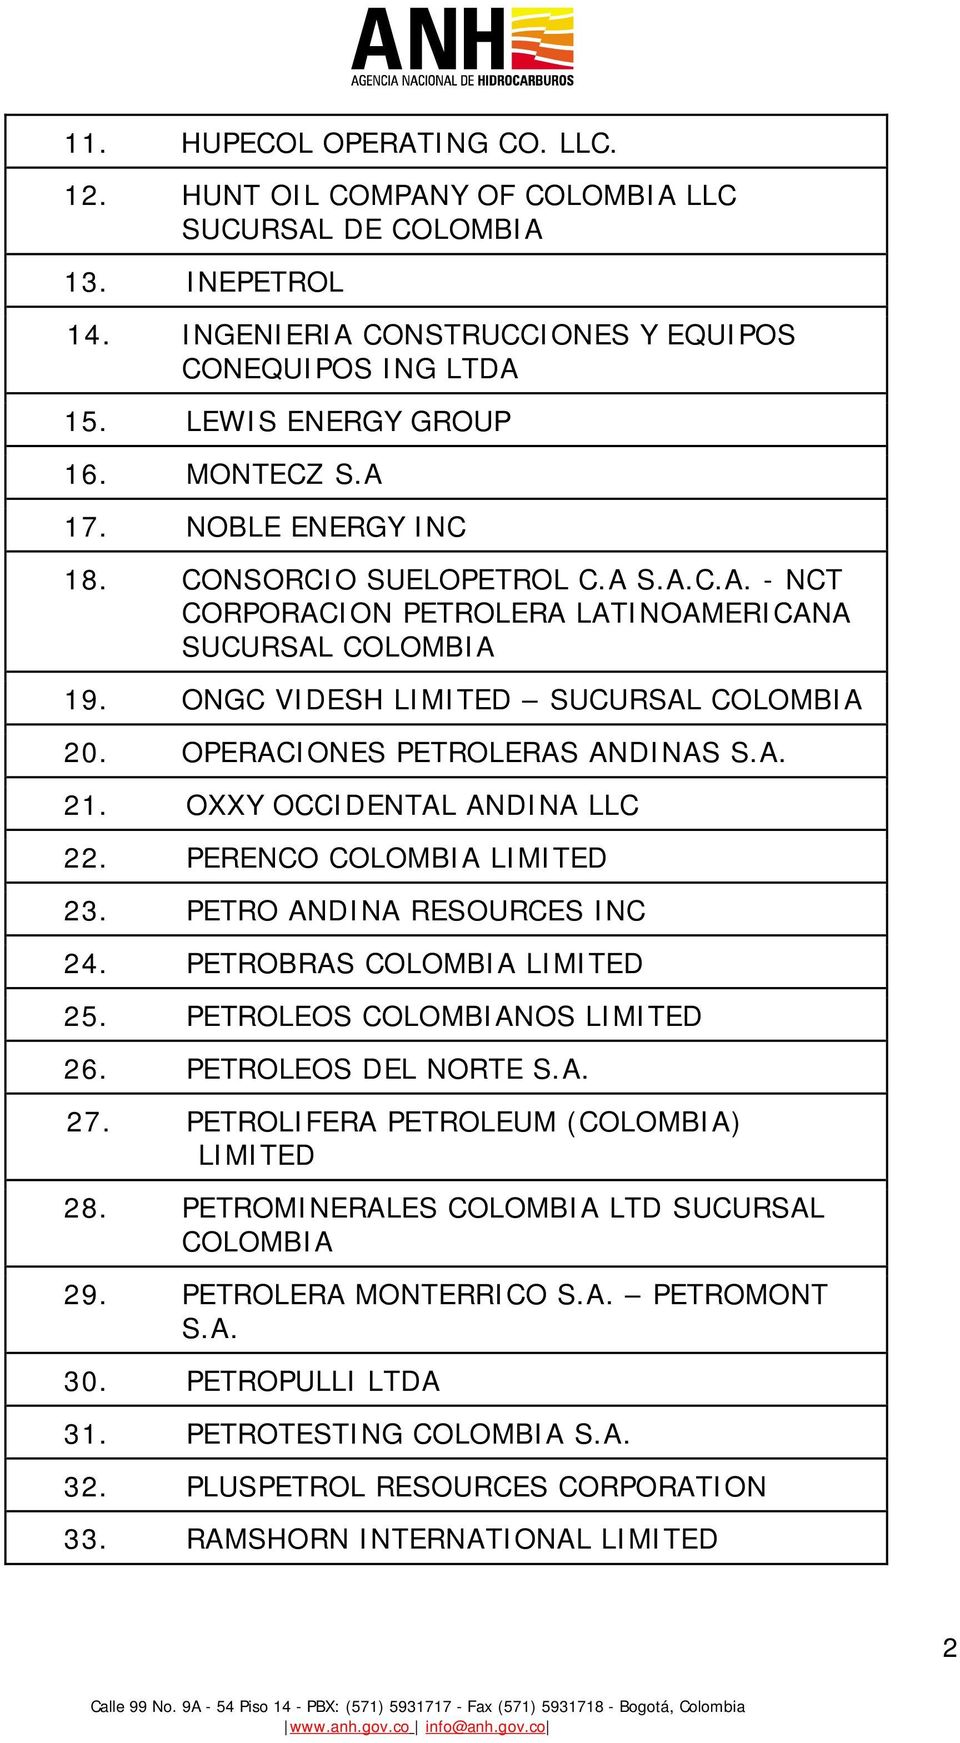 PERENCO COLOMBIA LIMITED 23. PETRO ANDINA RESOURCES INC 24. PETROBRAS COLOMBIA LIMITED 25. PETROLEOS COLOMBIANOS LIMITED 26. PETROLEOS DEL NORTE S.A. 27. PETROLIFERA PETROLEUM (COLOMBIA) LIMITED 28.